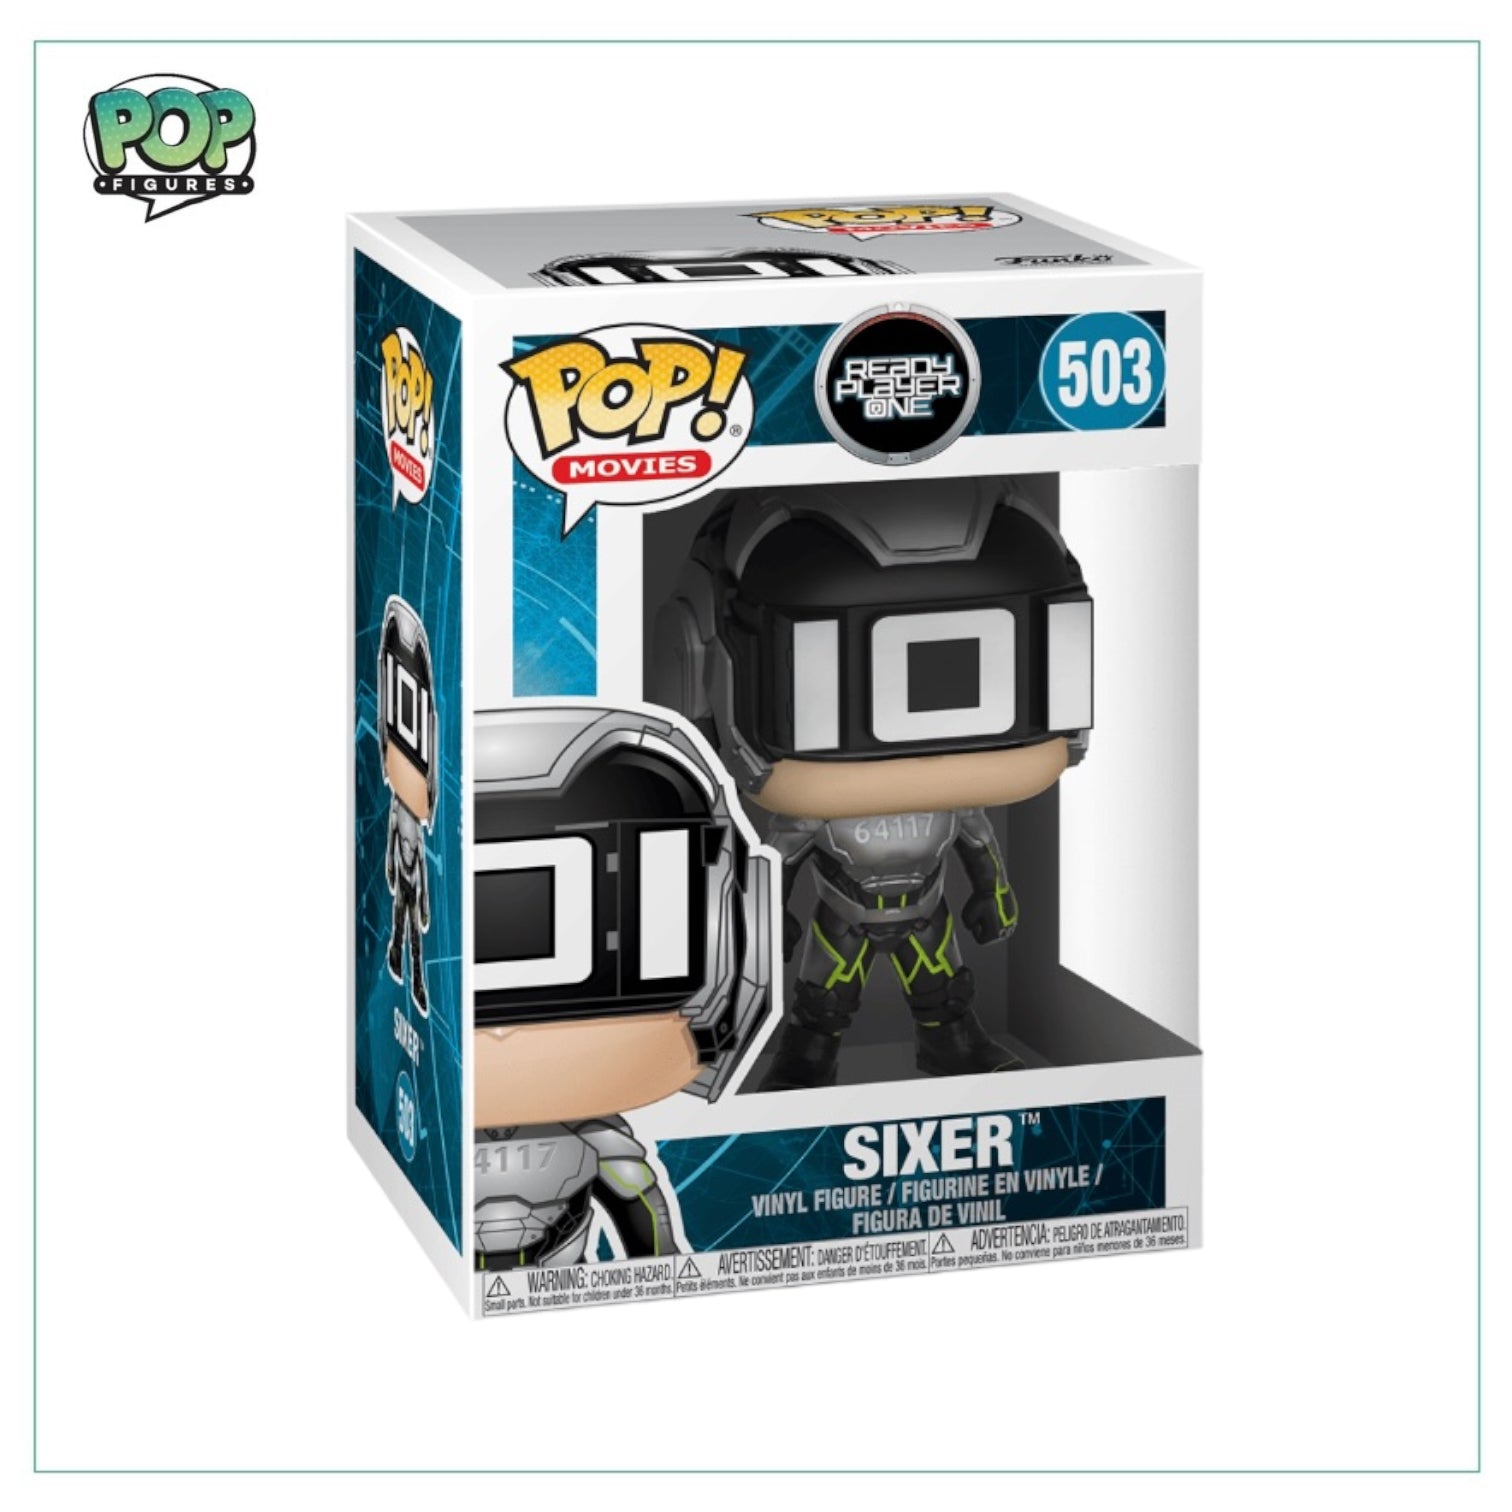 Sixer #503 Funko Pop! - Ready Player One - 2018 pop - Condition 9/10